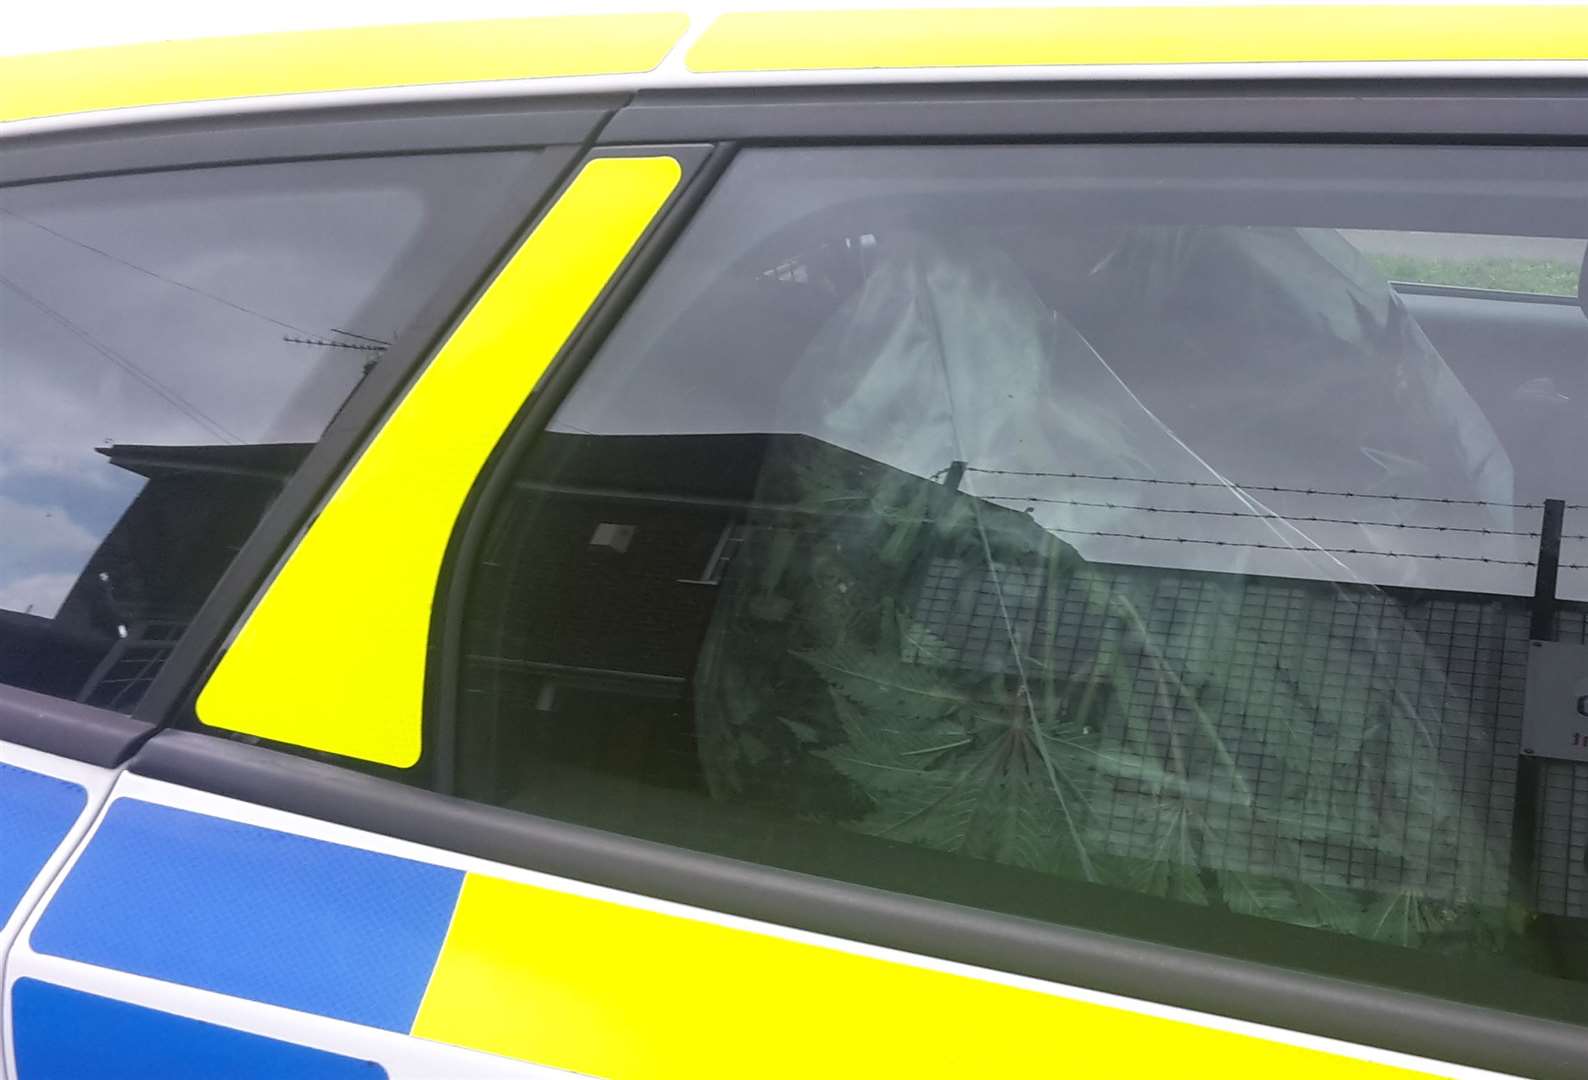 Police have filled at least 10 police cars with cannabis plants after raiding a house in New Road, Sheerness